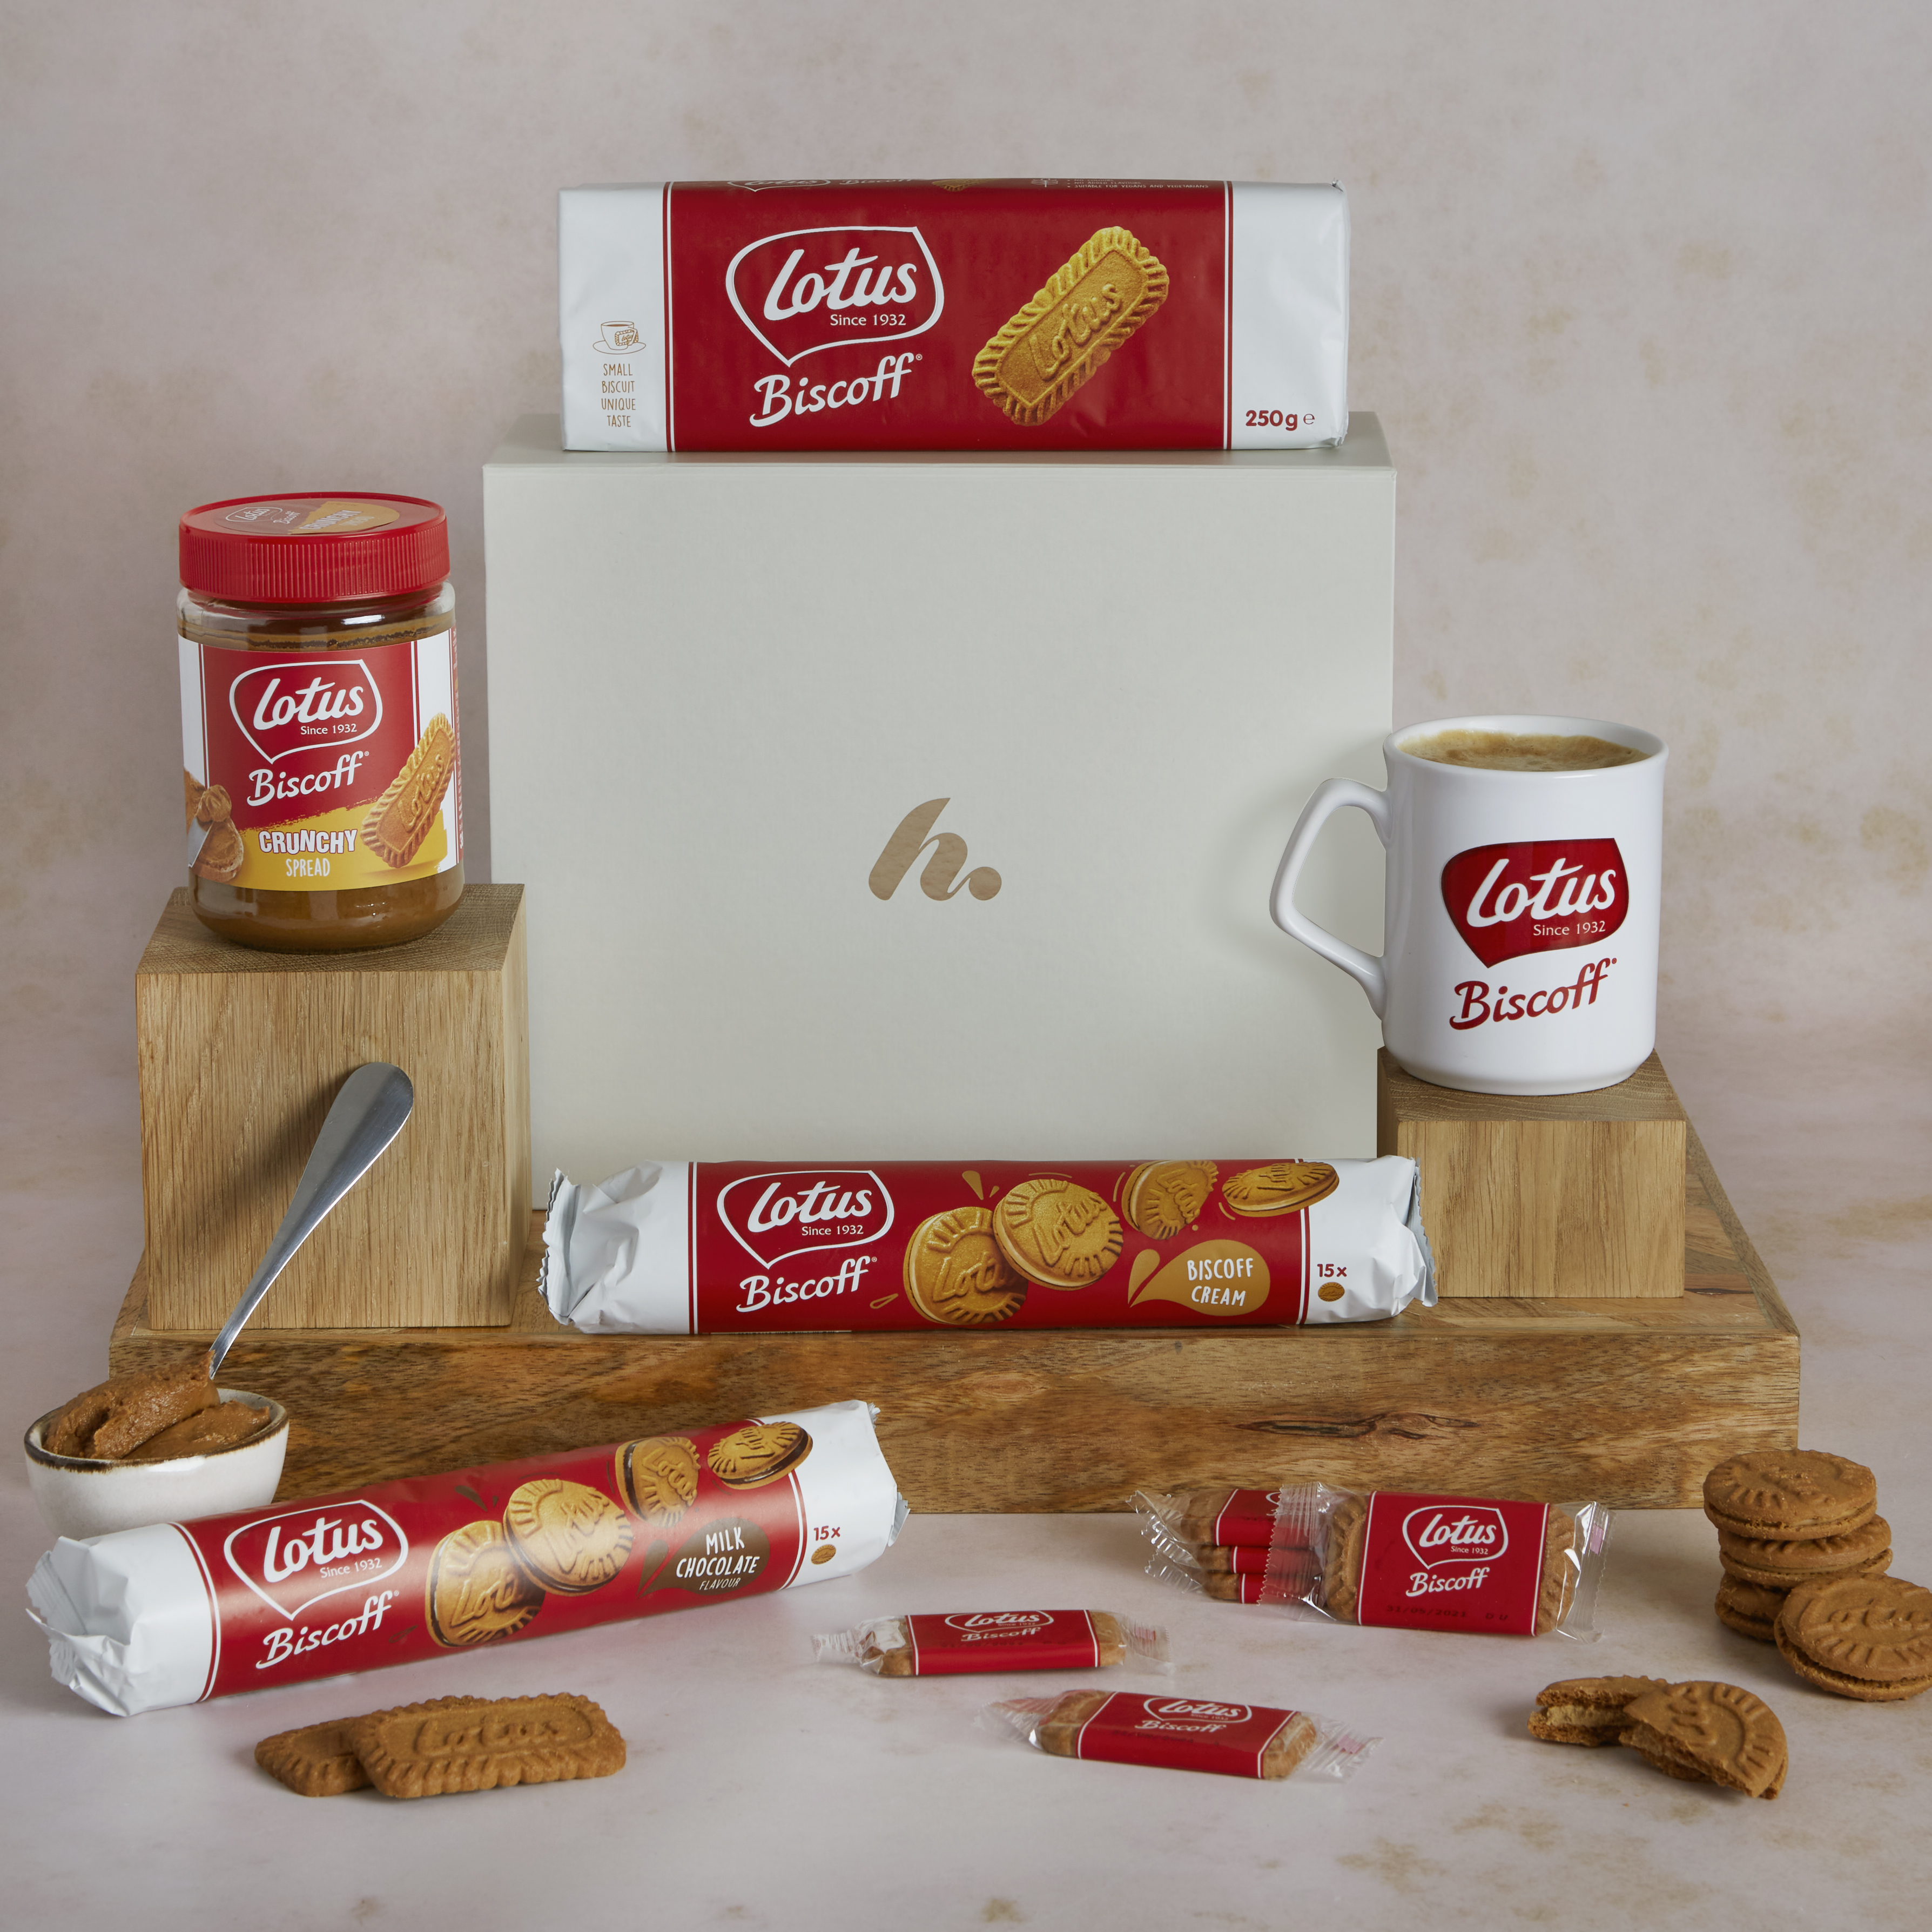 The Lotus Biscoff Coffee Break gift box available at hampers.com